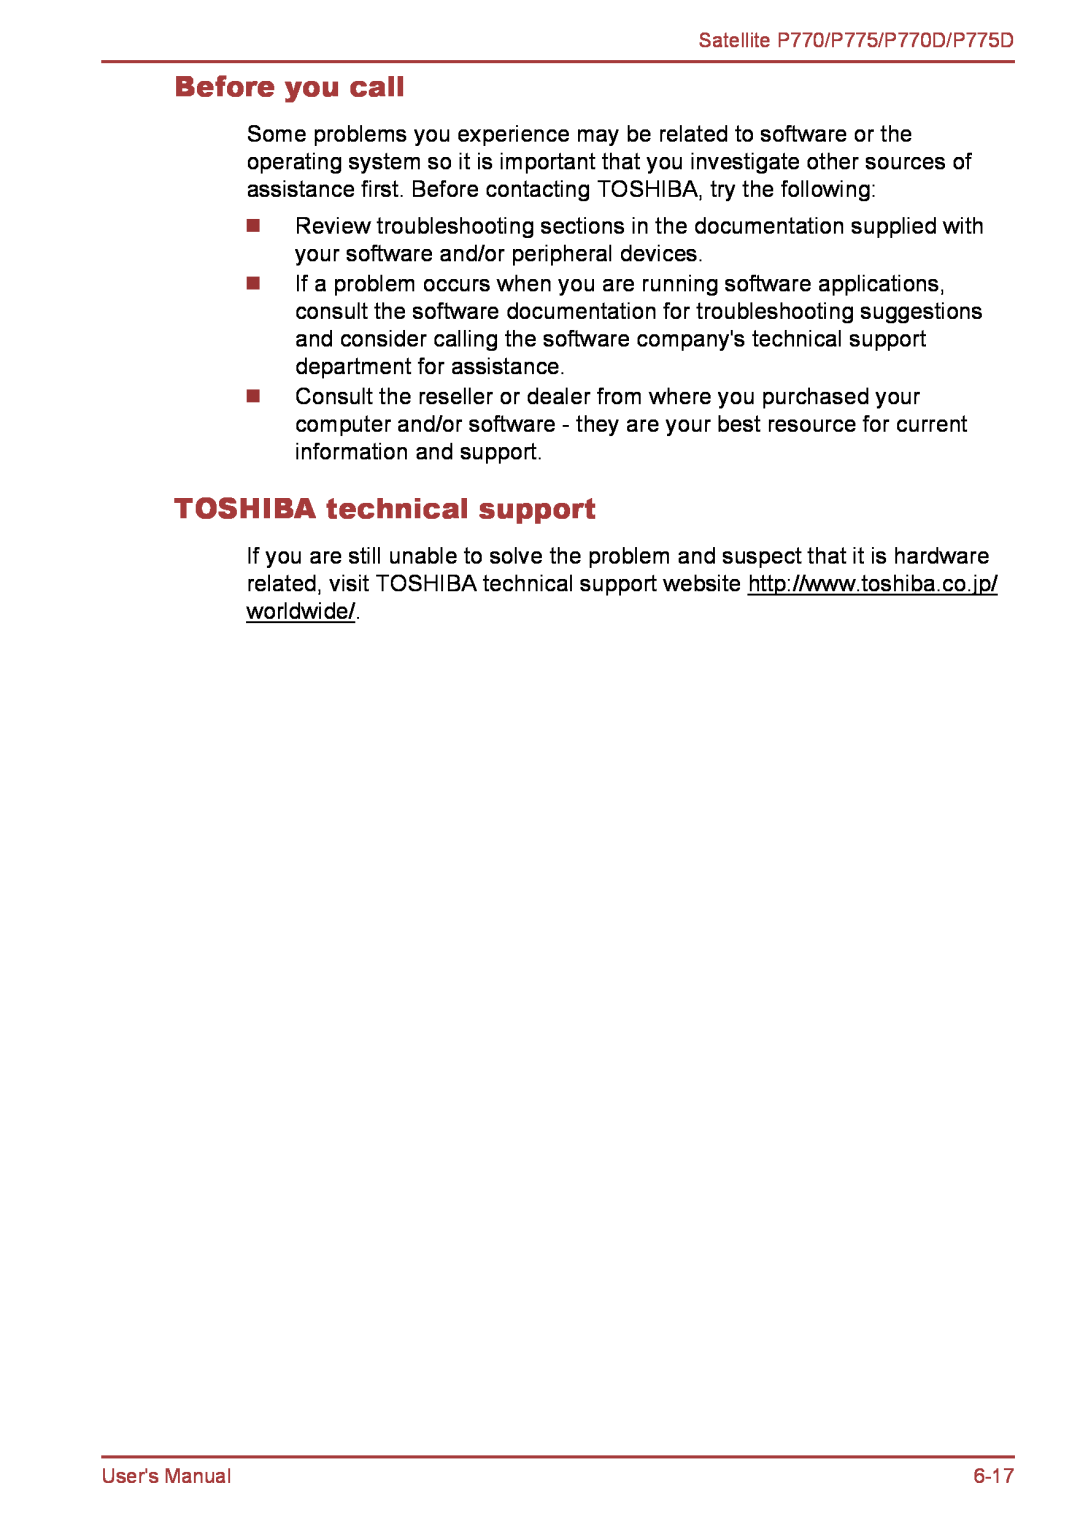 Toshiba P770 user manual Before you call, TOSHIBA technical support 